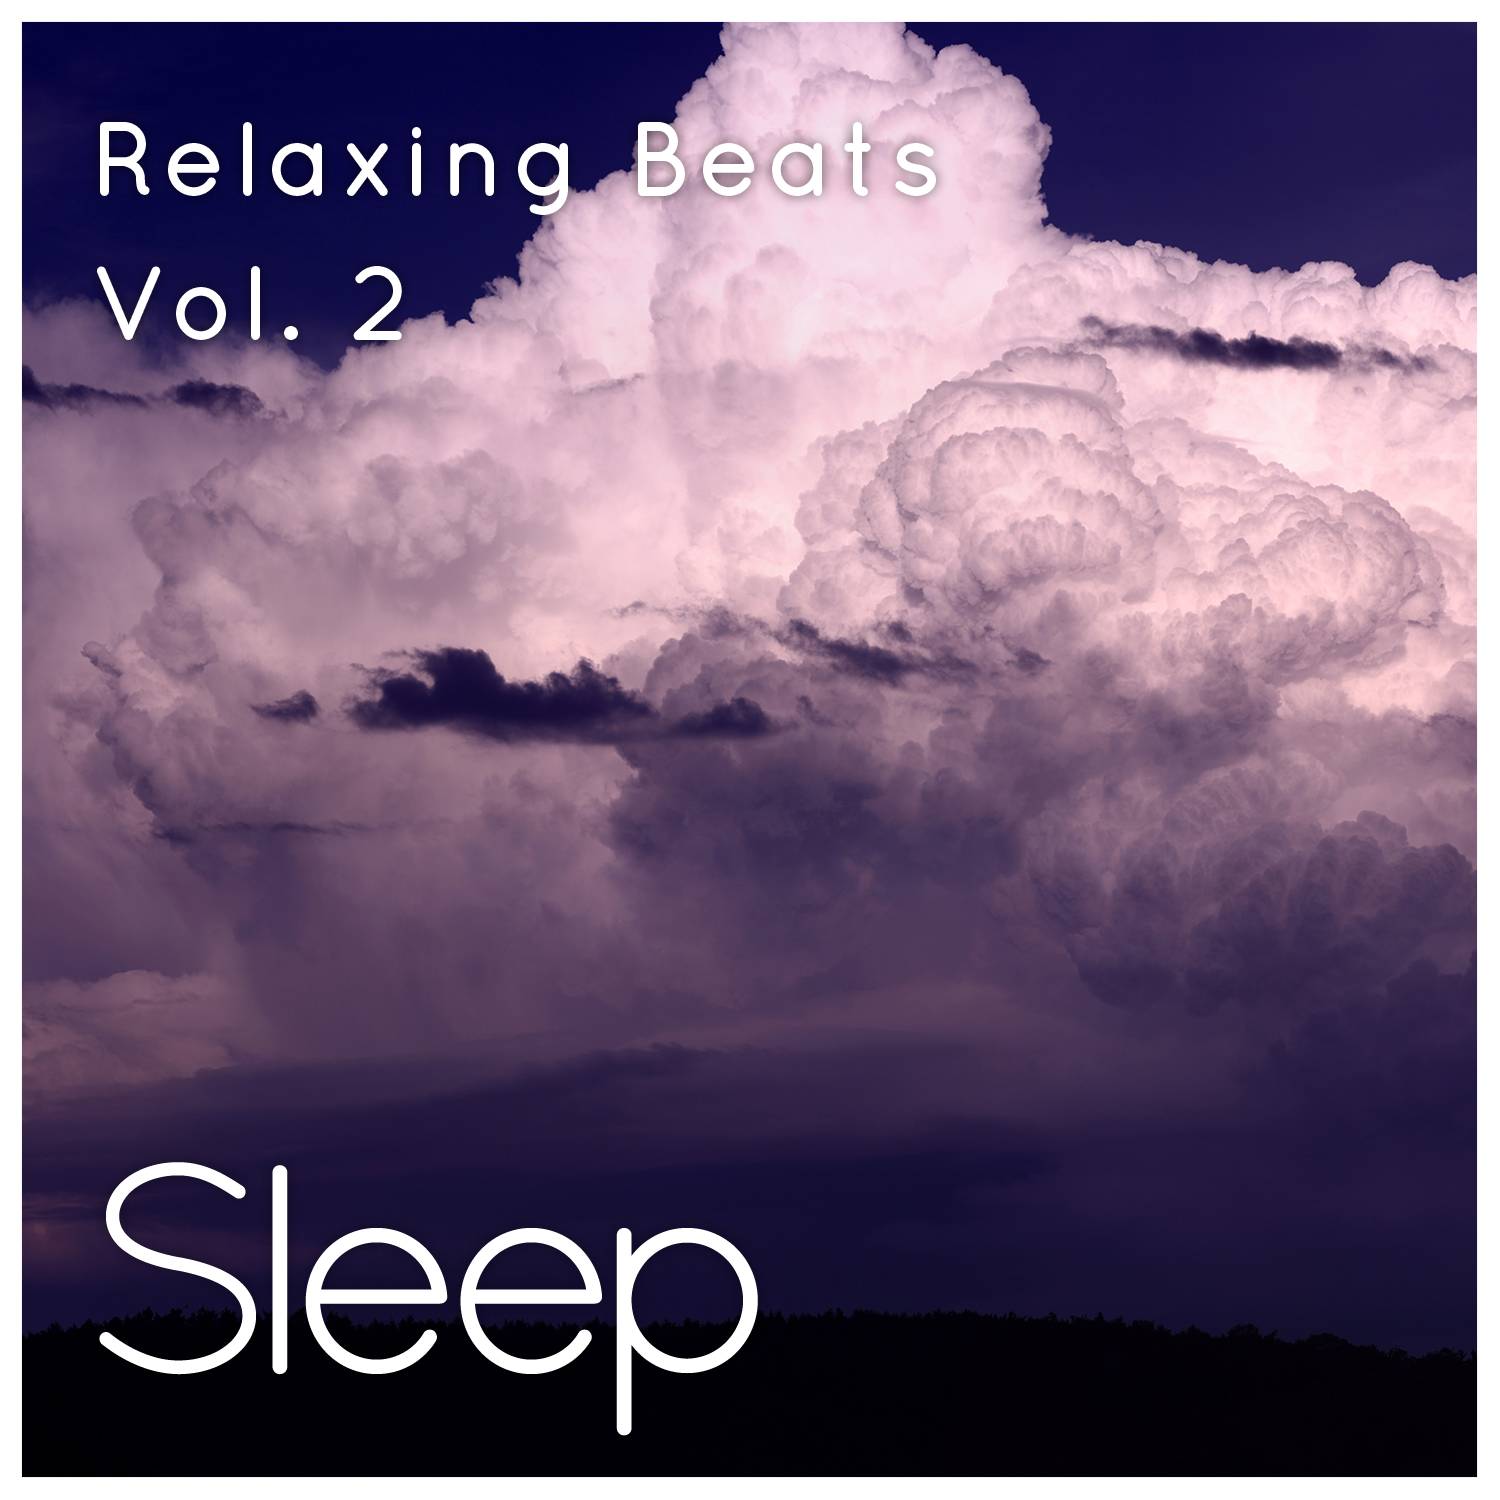 Relaxing Ambient Sleep Sounds, Pt. 7